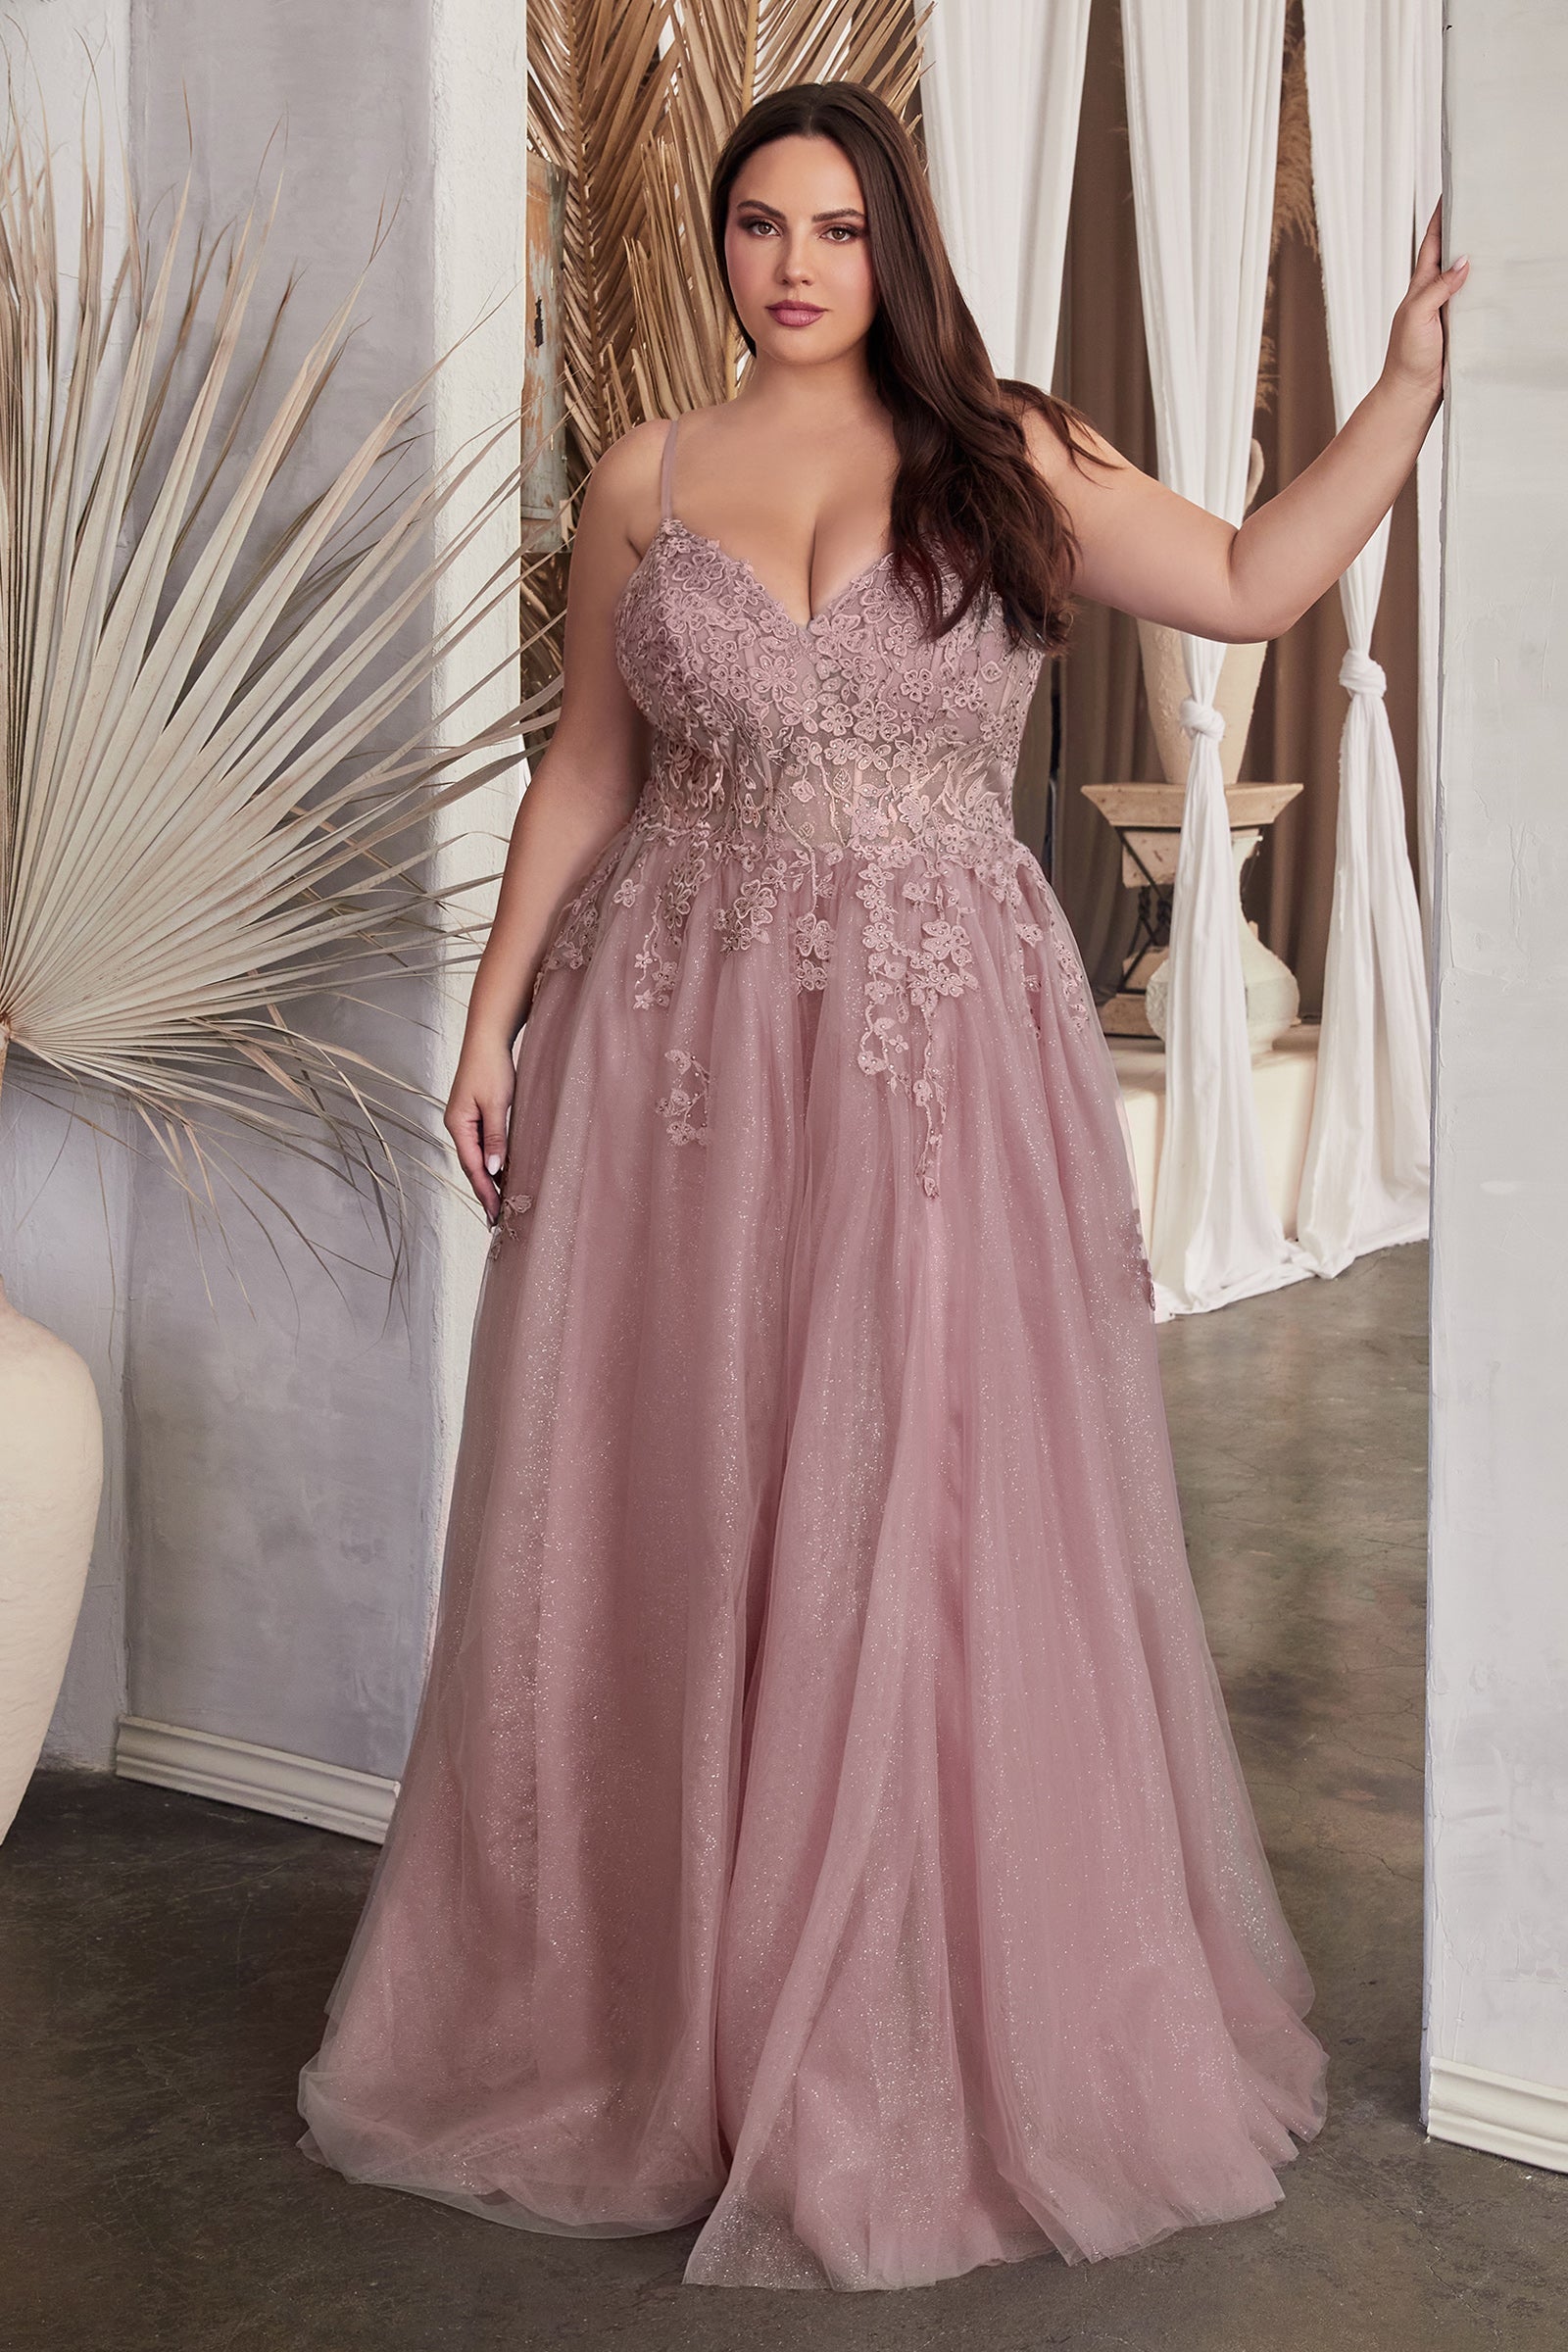 Plus Size Evening Dresses for Mom Sequin Chiffon Floor Length - Ever-Pretty  US